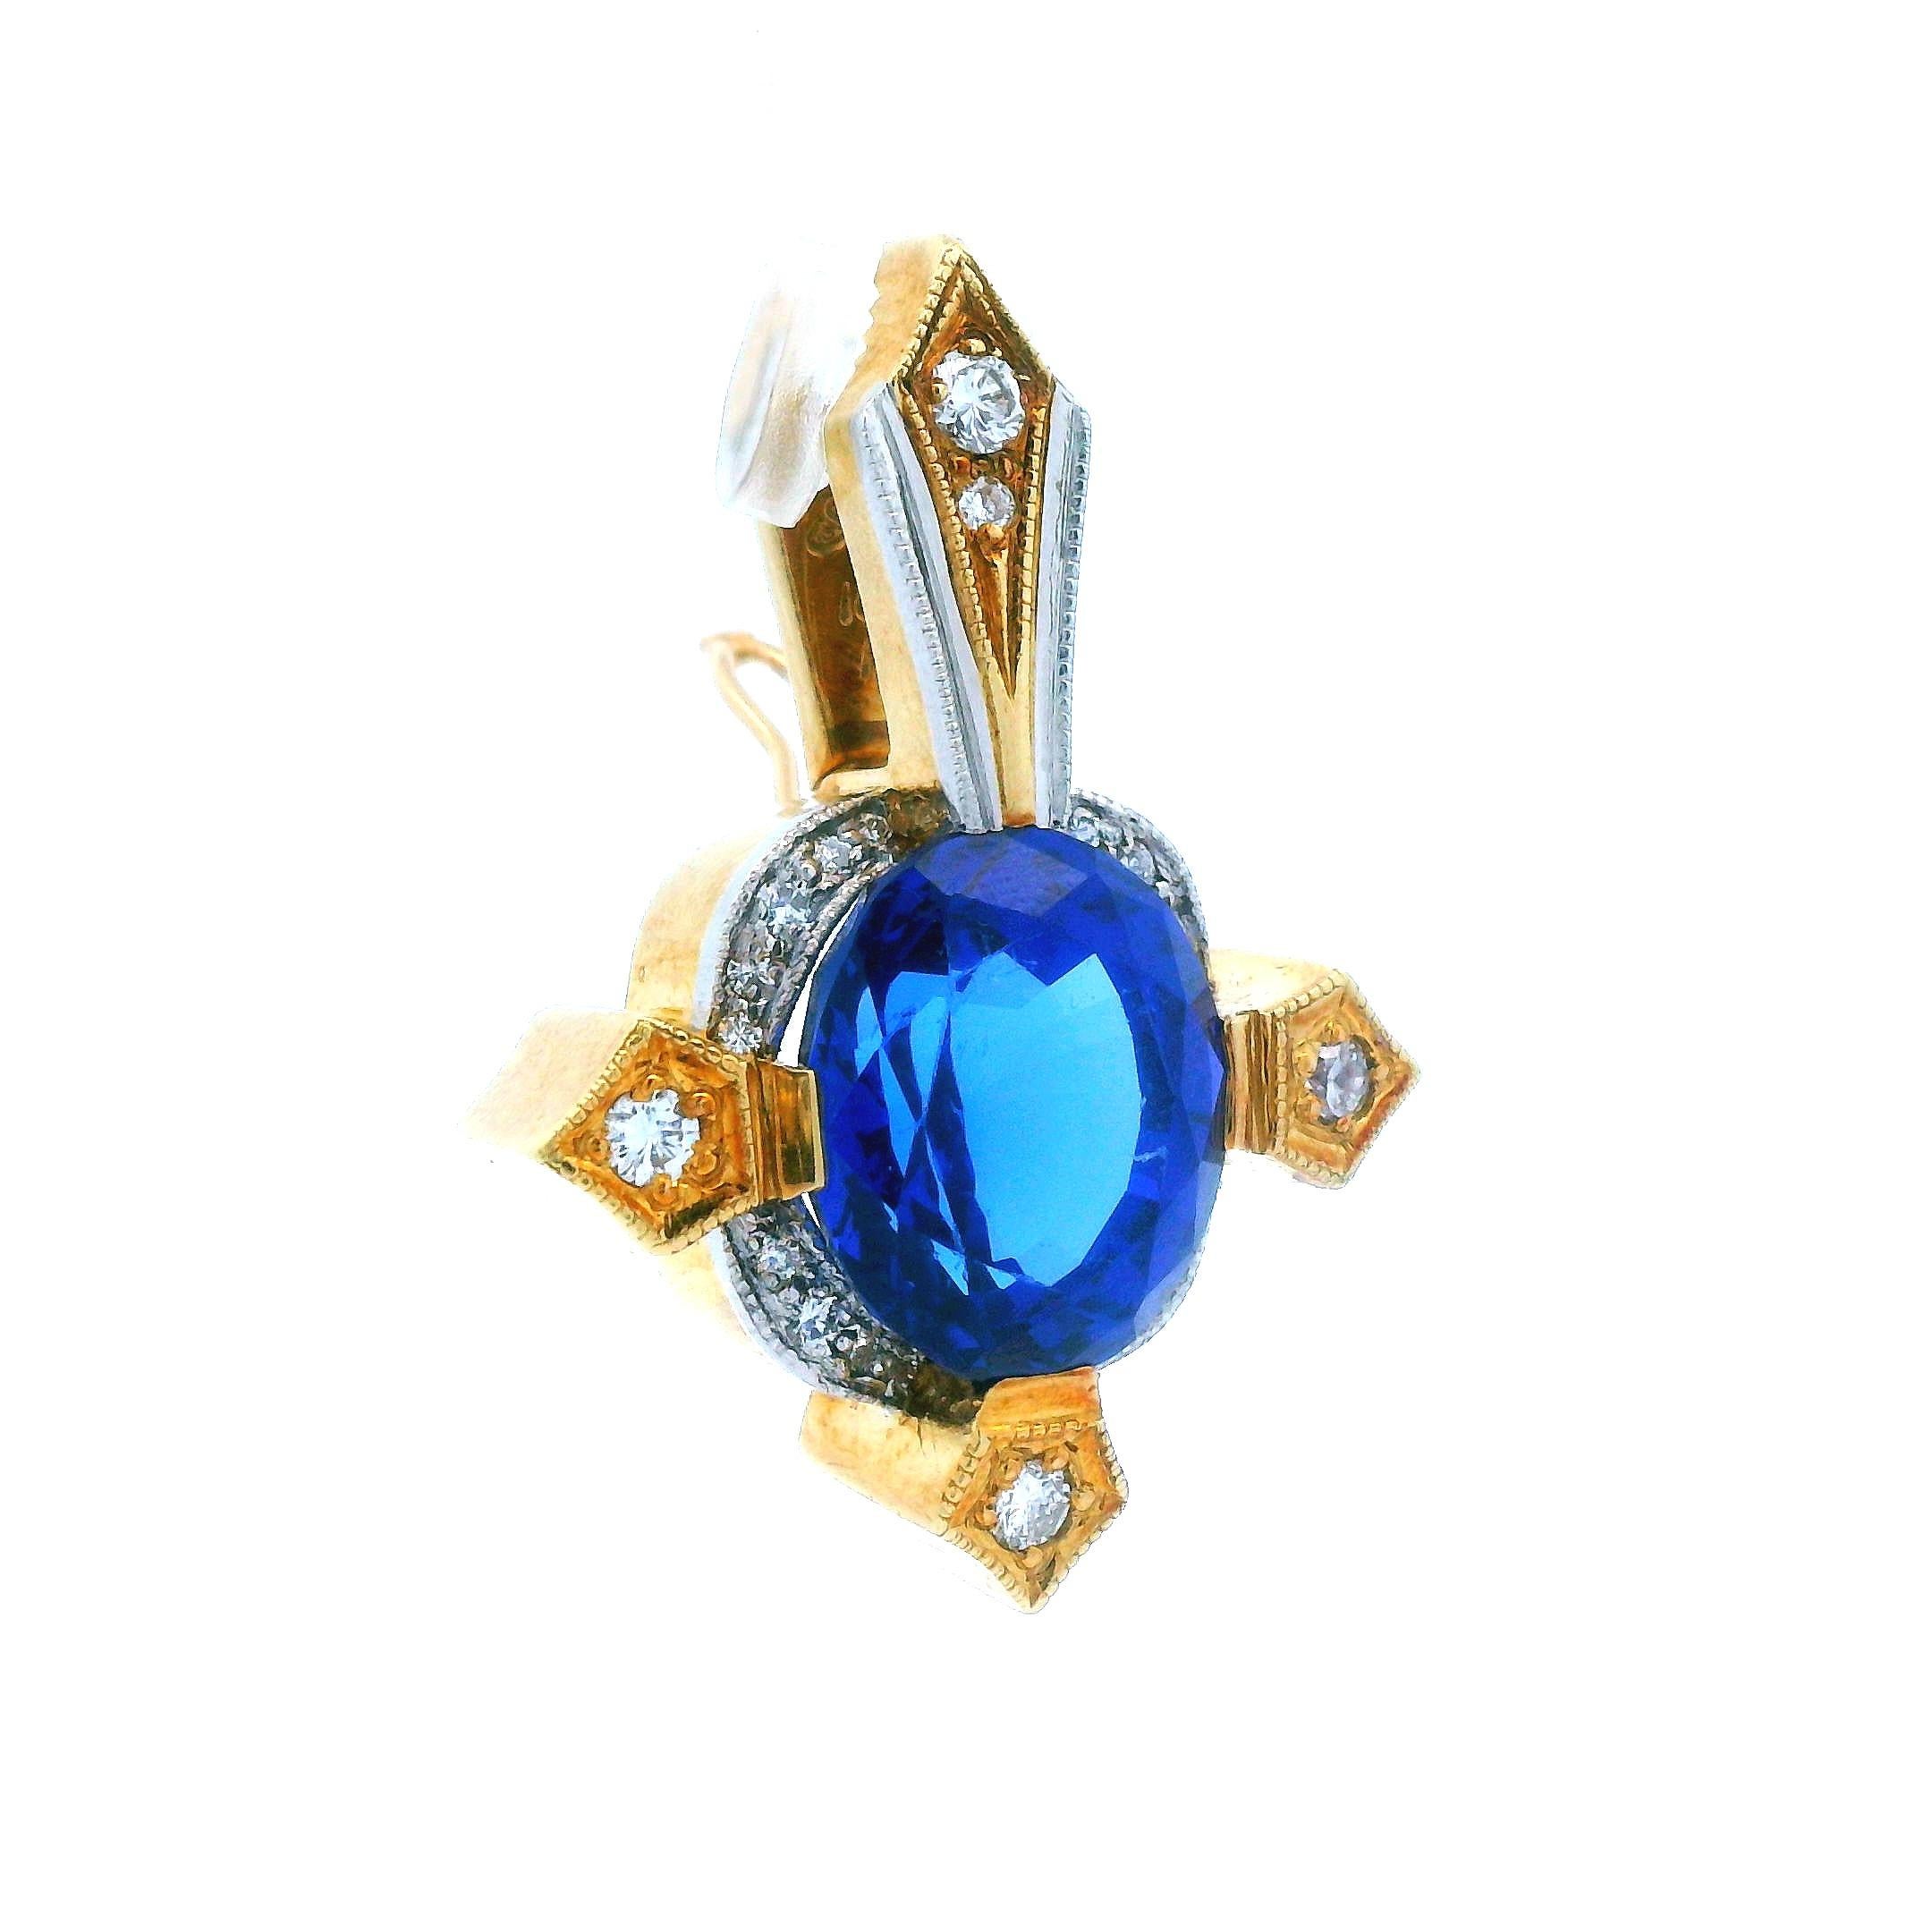 This 18k yellow gold and platinum pendant with tanzanite and diamond is extraordinary. Being made in rich, 18k yellow gold, and platinum, a forever white metal, this pendant exudes excellence. The center stone of this lovely pendant is a 10.00 ct,